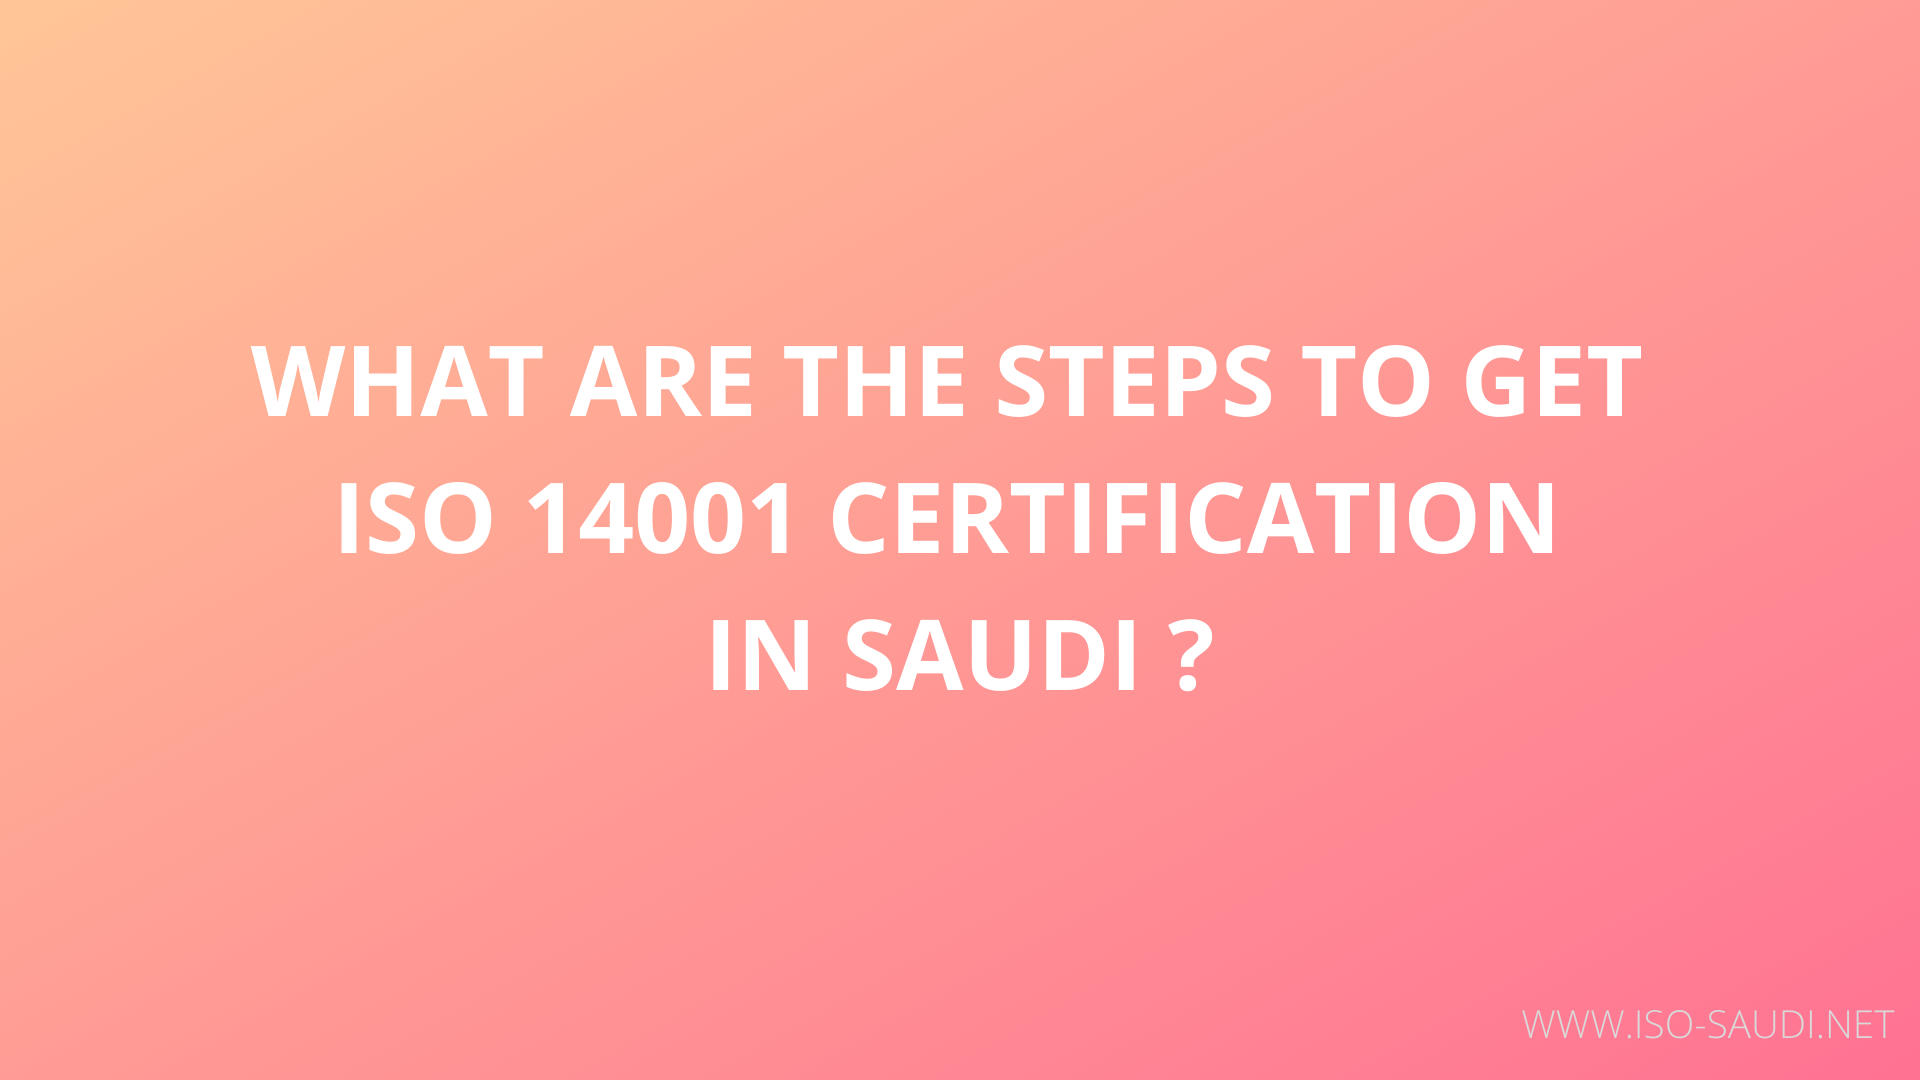 WHAT ARE THE STEPS TO GET ISO 14001 CERTIFICATION IN SAUDI ?